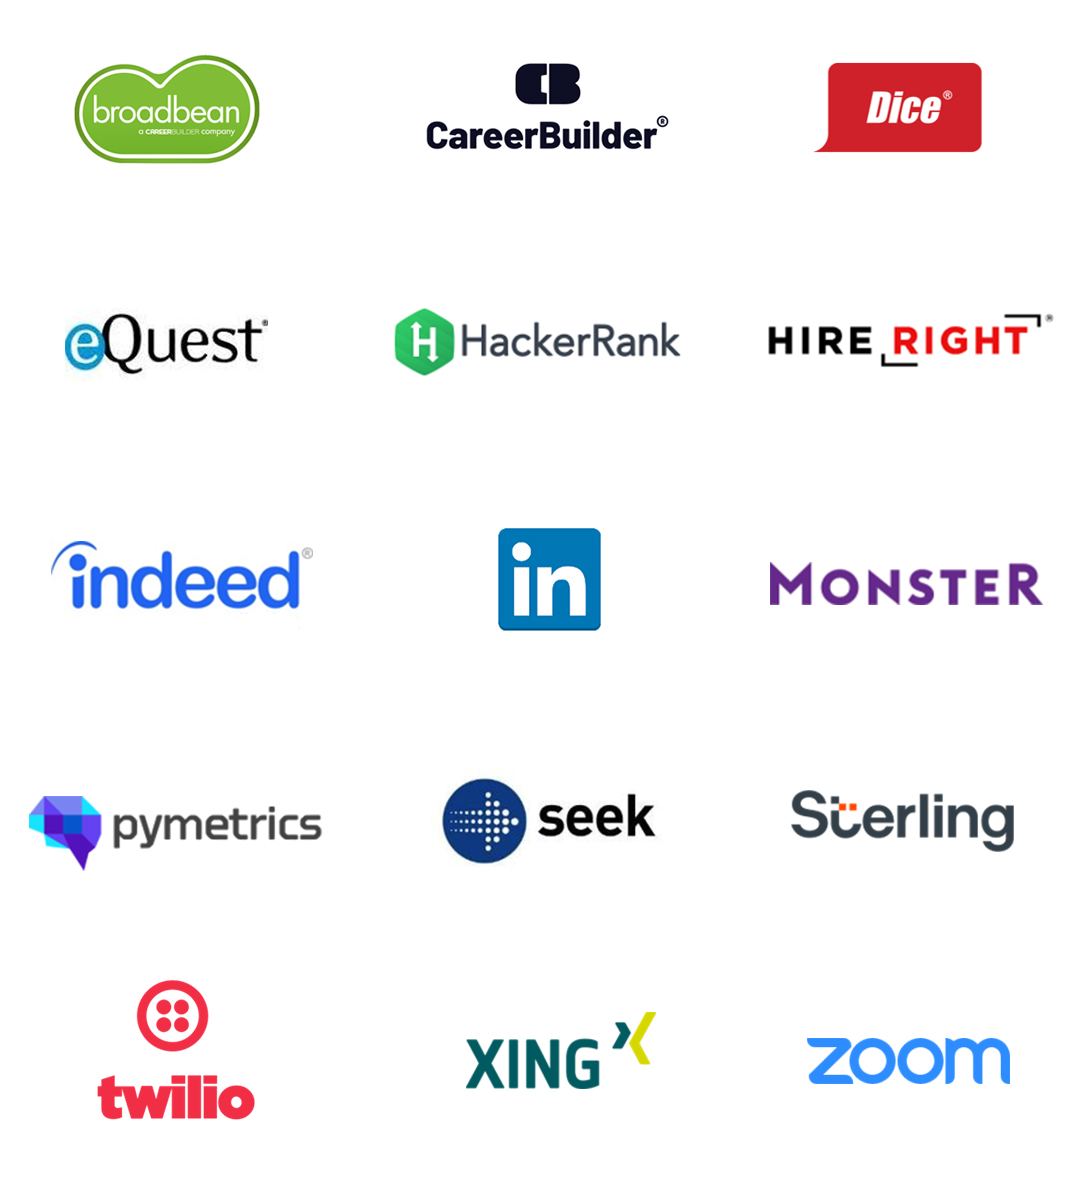 A list of companies commonly used in sourcing and in the recruiting process that Avature can integrate with.